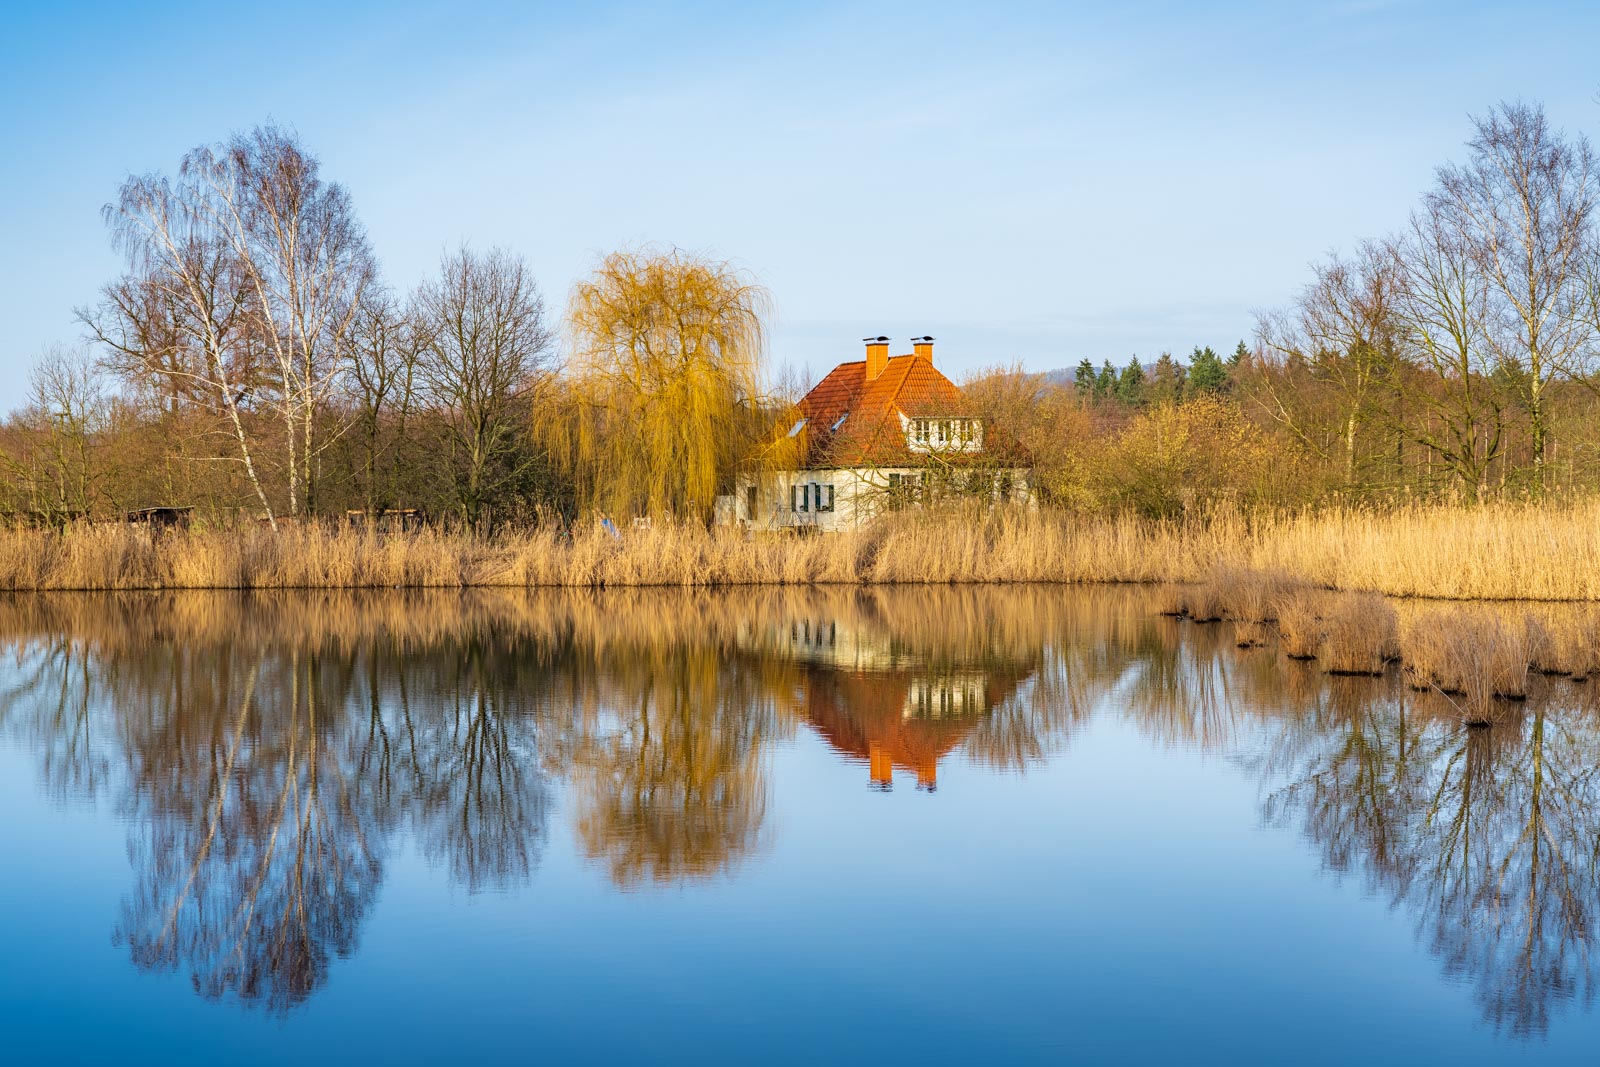 Reflection in a pond at 'Rieselfelder Windel'.